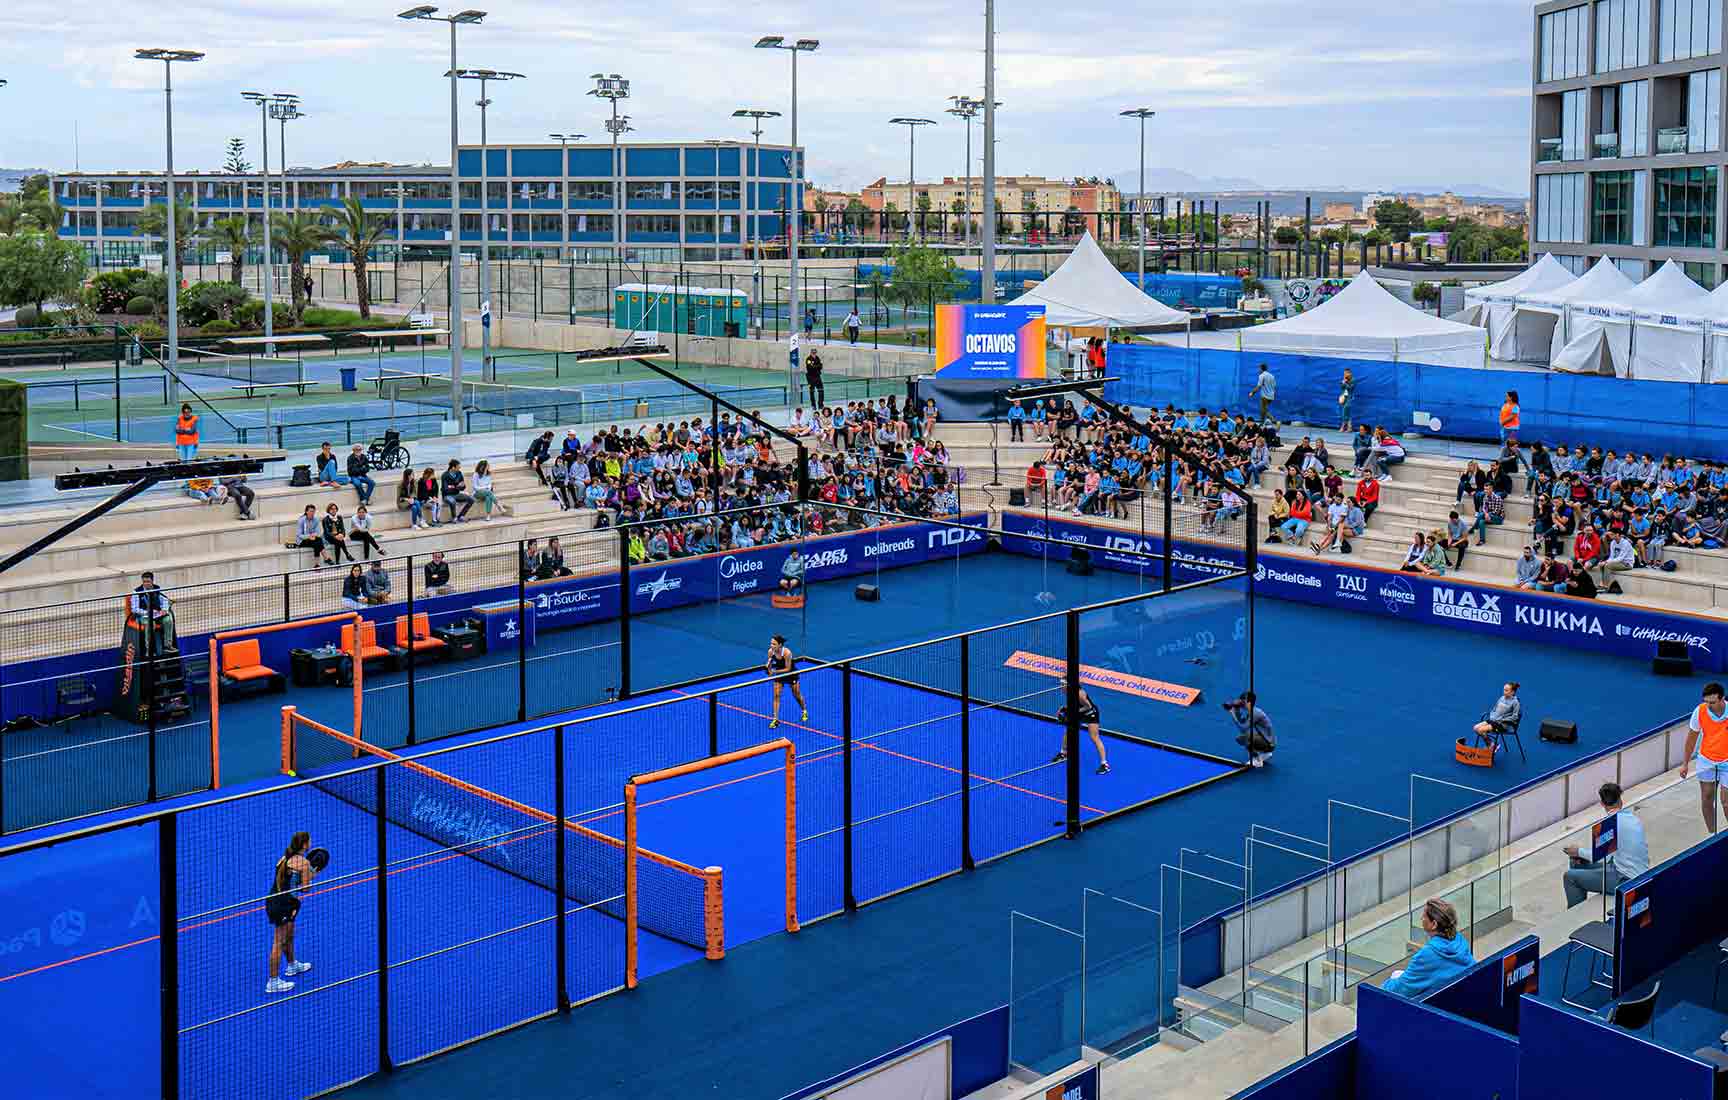 The Rafa Nadal Academy by Movistar transforms to host the TAU Cerámica Mallorca Challenger